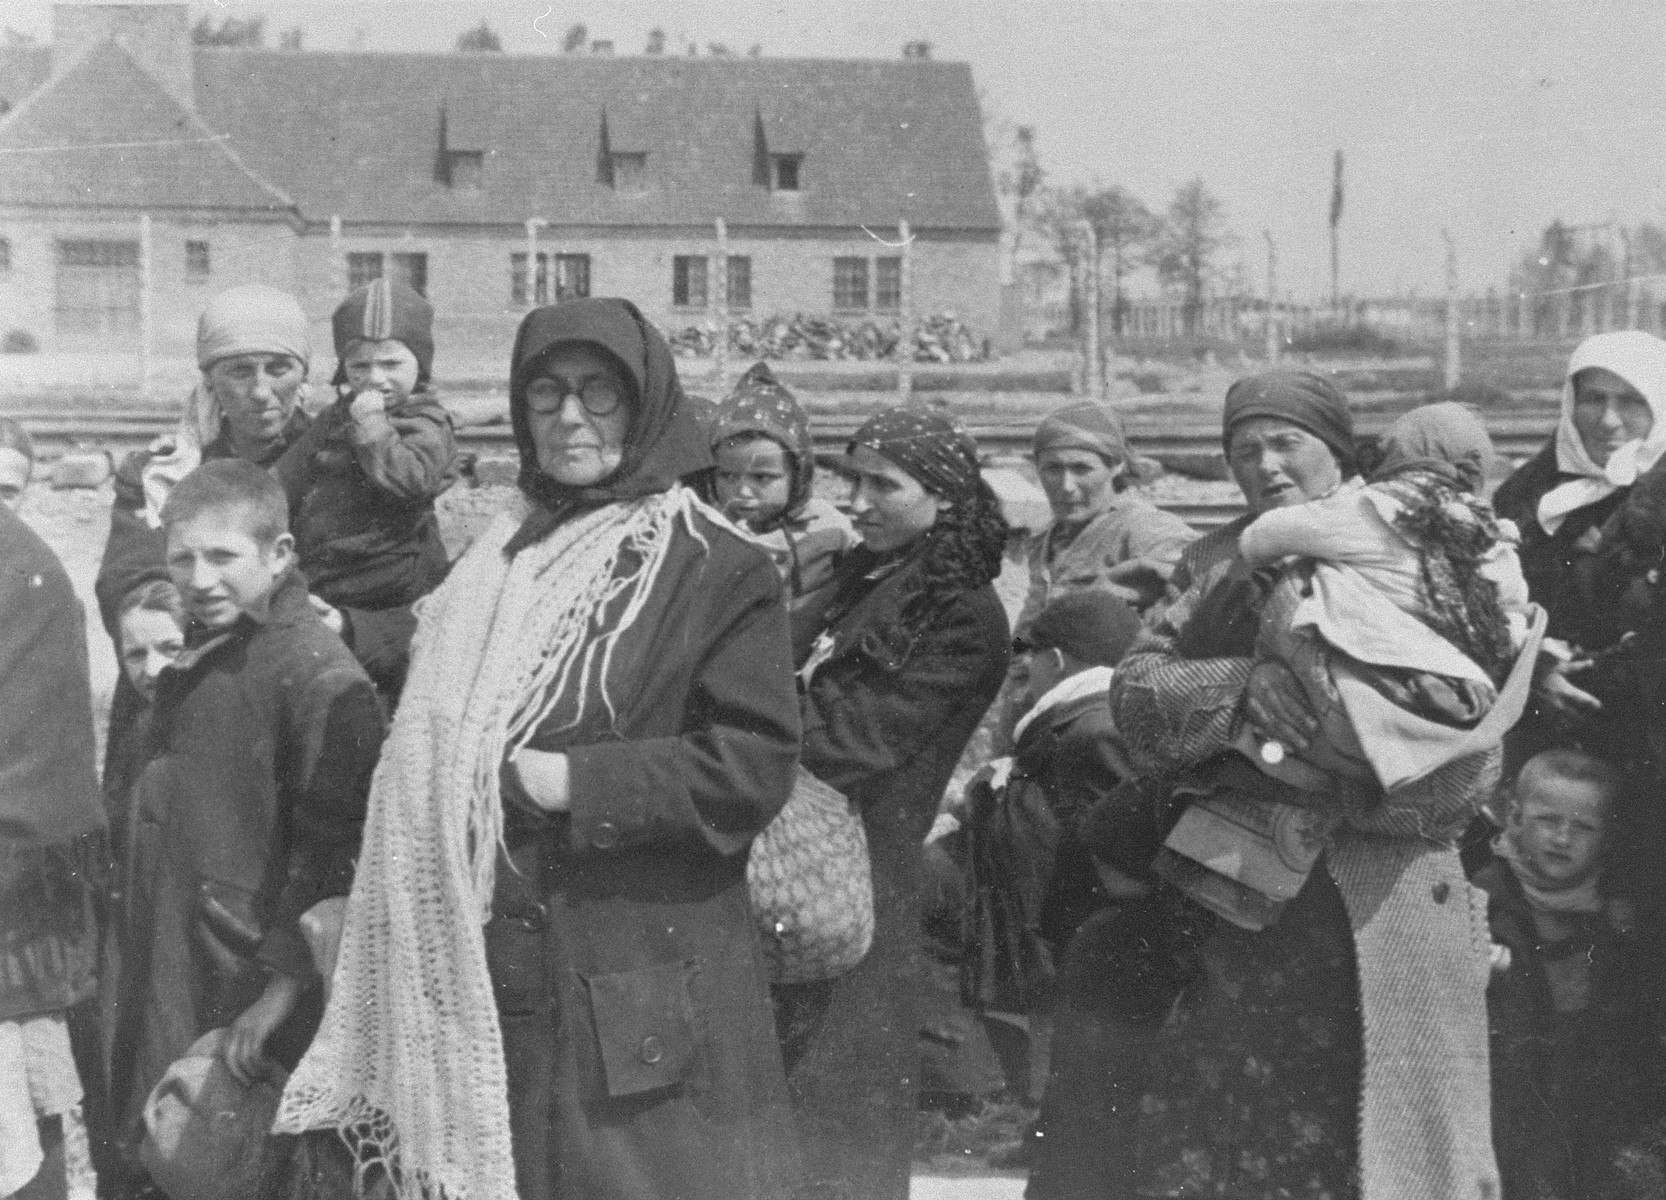 Jewish women and children from Subcarpathian Rus who have been selected for death at Auschwitz-Birkenau, walk toward the gas chambers.

The building in the background is crematorium III. 

Those pictured include Iboja Hoffman of Bodrogkeresztur, her aunt Lena Egri, Ruth Hoffman (Iboja's sister), Malwin Hoffman (Iboja and Ruth's mother), Piroska Szaz of Tokaj (Lena and Malwin's sister), Piroska's daughter and Karcsi Szaz (Piroska's son).